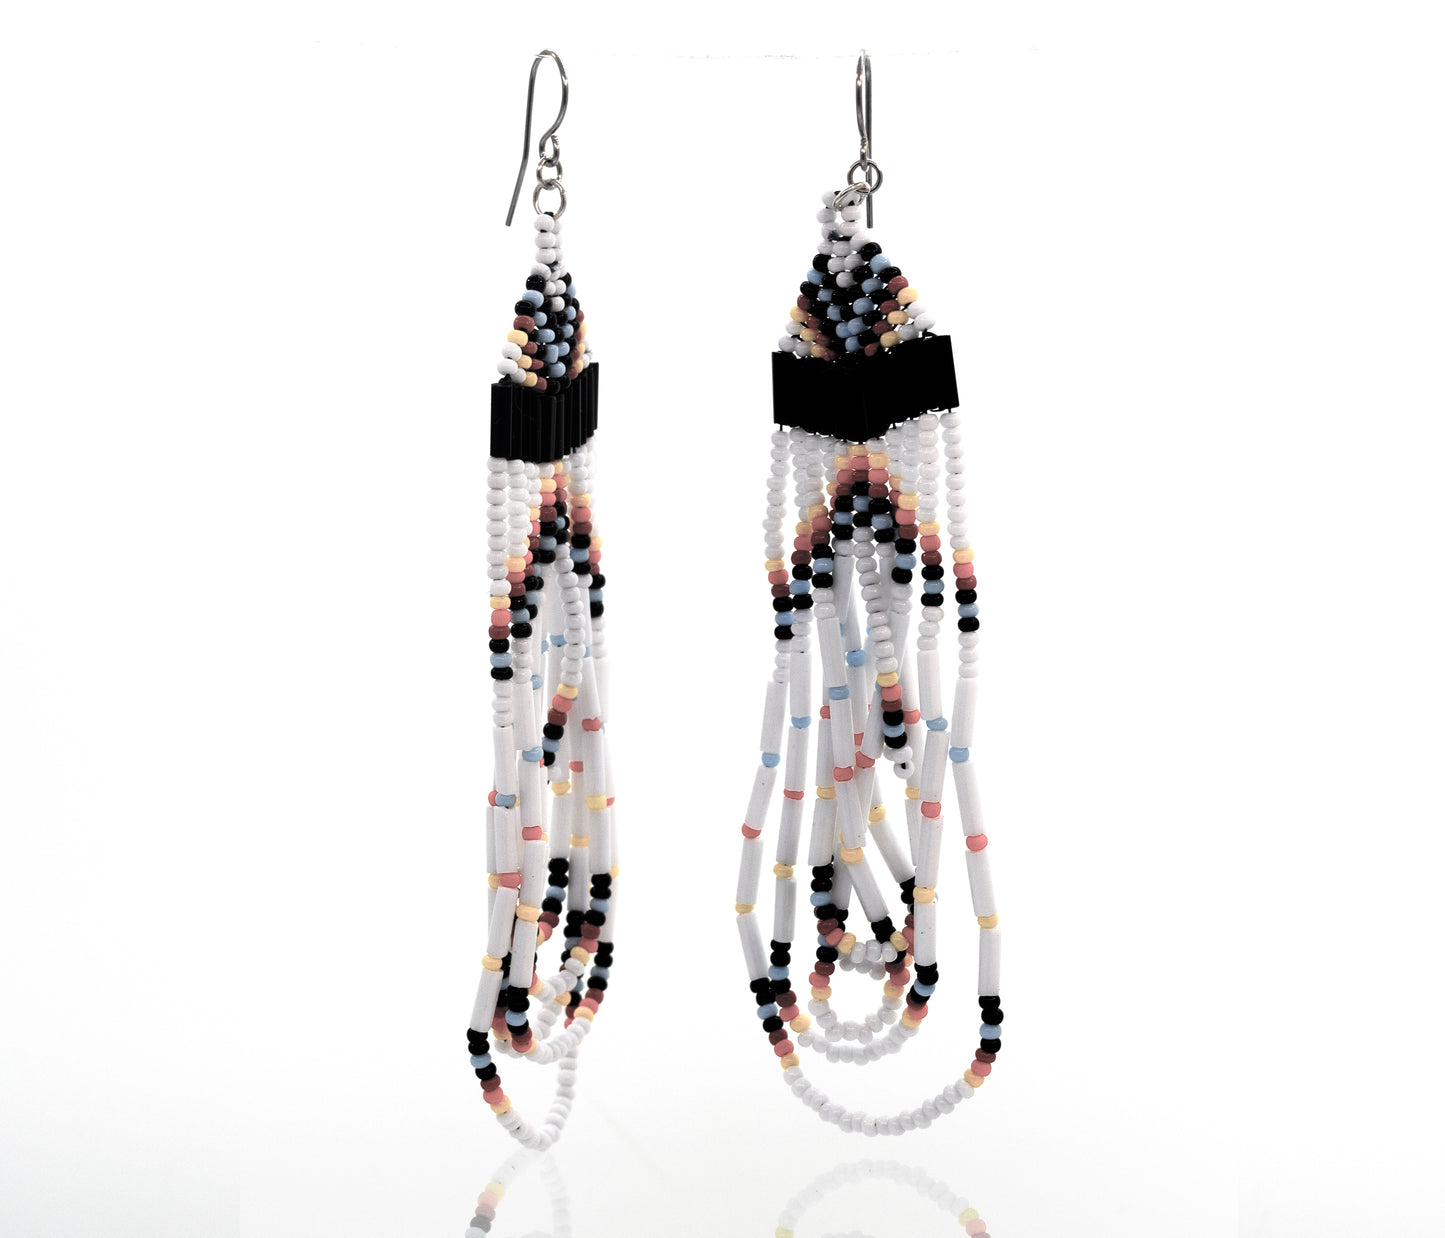 A pair of Super Silver Handmade Multi-Stone Beaded Dangle Earrings in black and white, crafted with surgical steel hooks, displayed on a white surface.